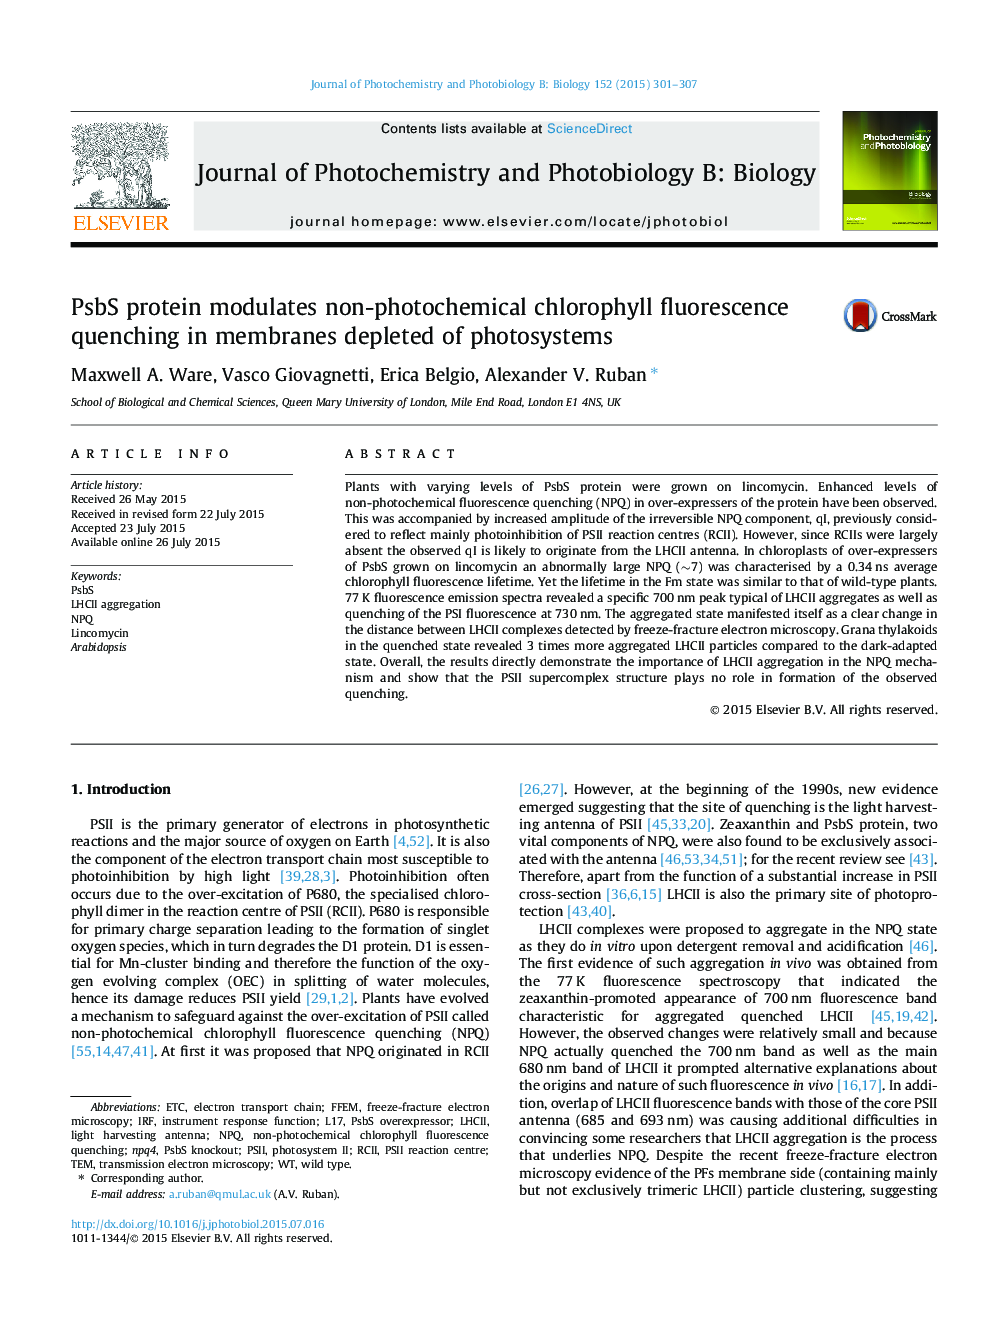 PsbS protein modulates non-photochemical chlorophyll fluorescence quenching in membranes depleted of photosystems